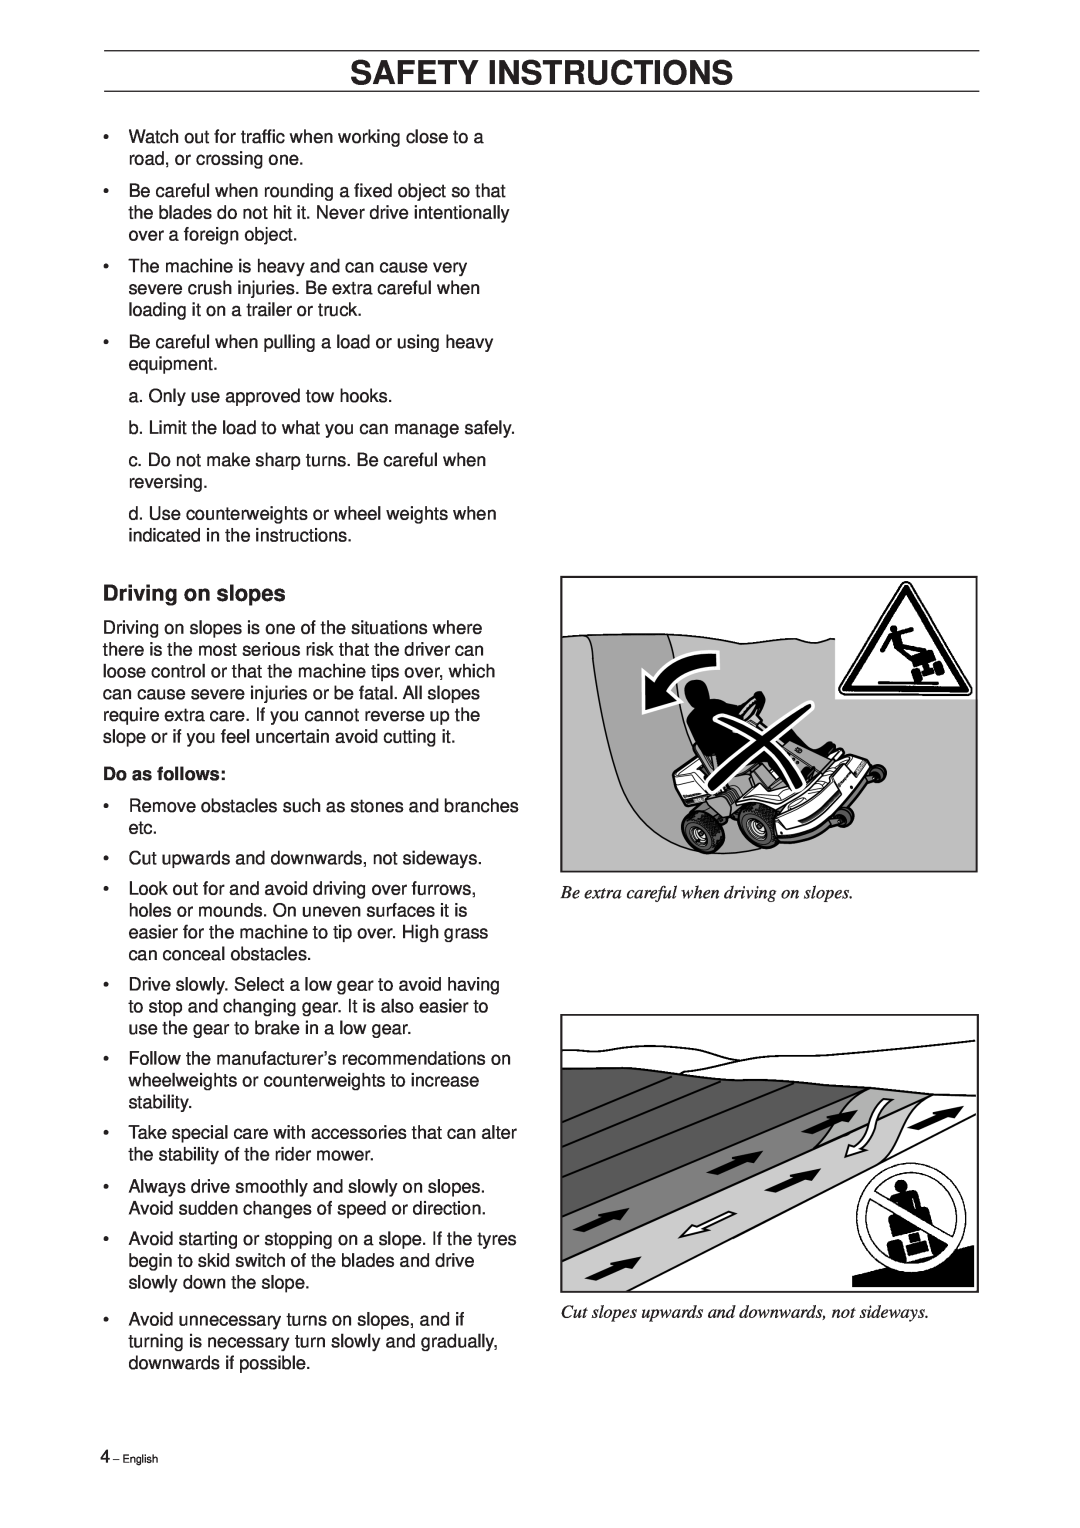 Husqvarna 11 Bio/13 H Bio Driving on slopes, Do as follows, Be extra careful when driving on slopes, Safety Instructions 